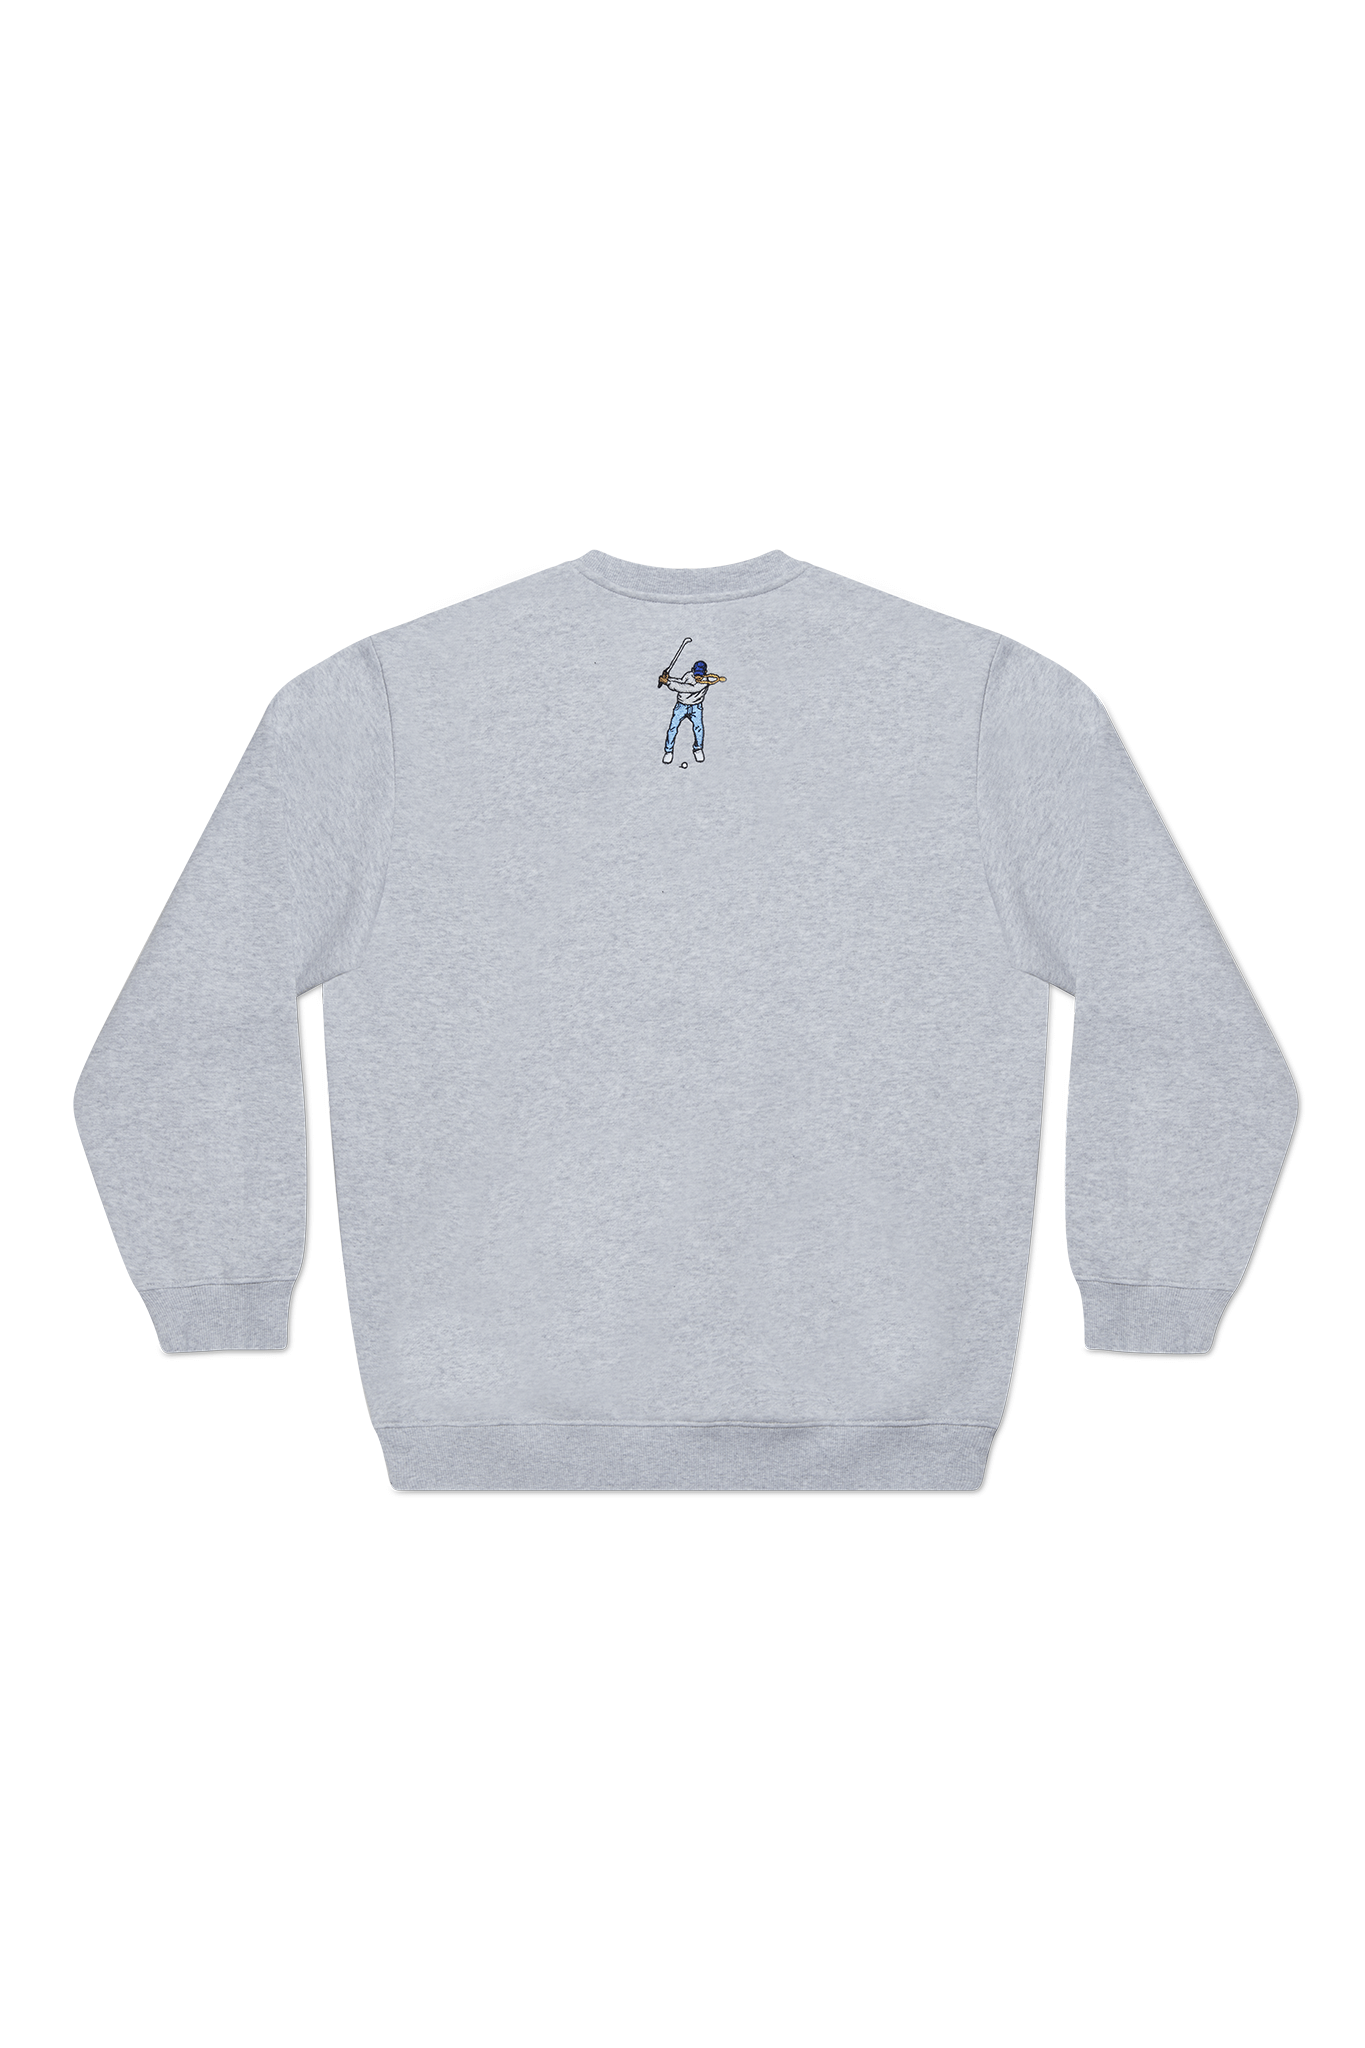 Eastside NBA - Playing Golf After This All Star Oversized Sweatshirt Grey